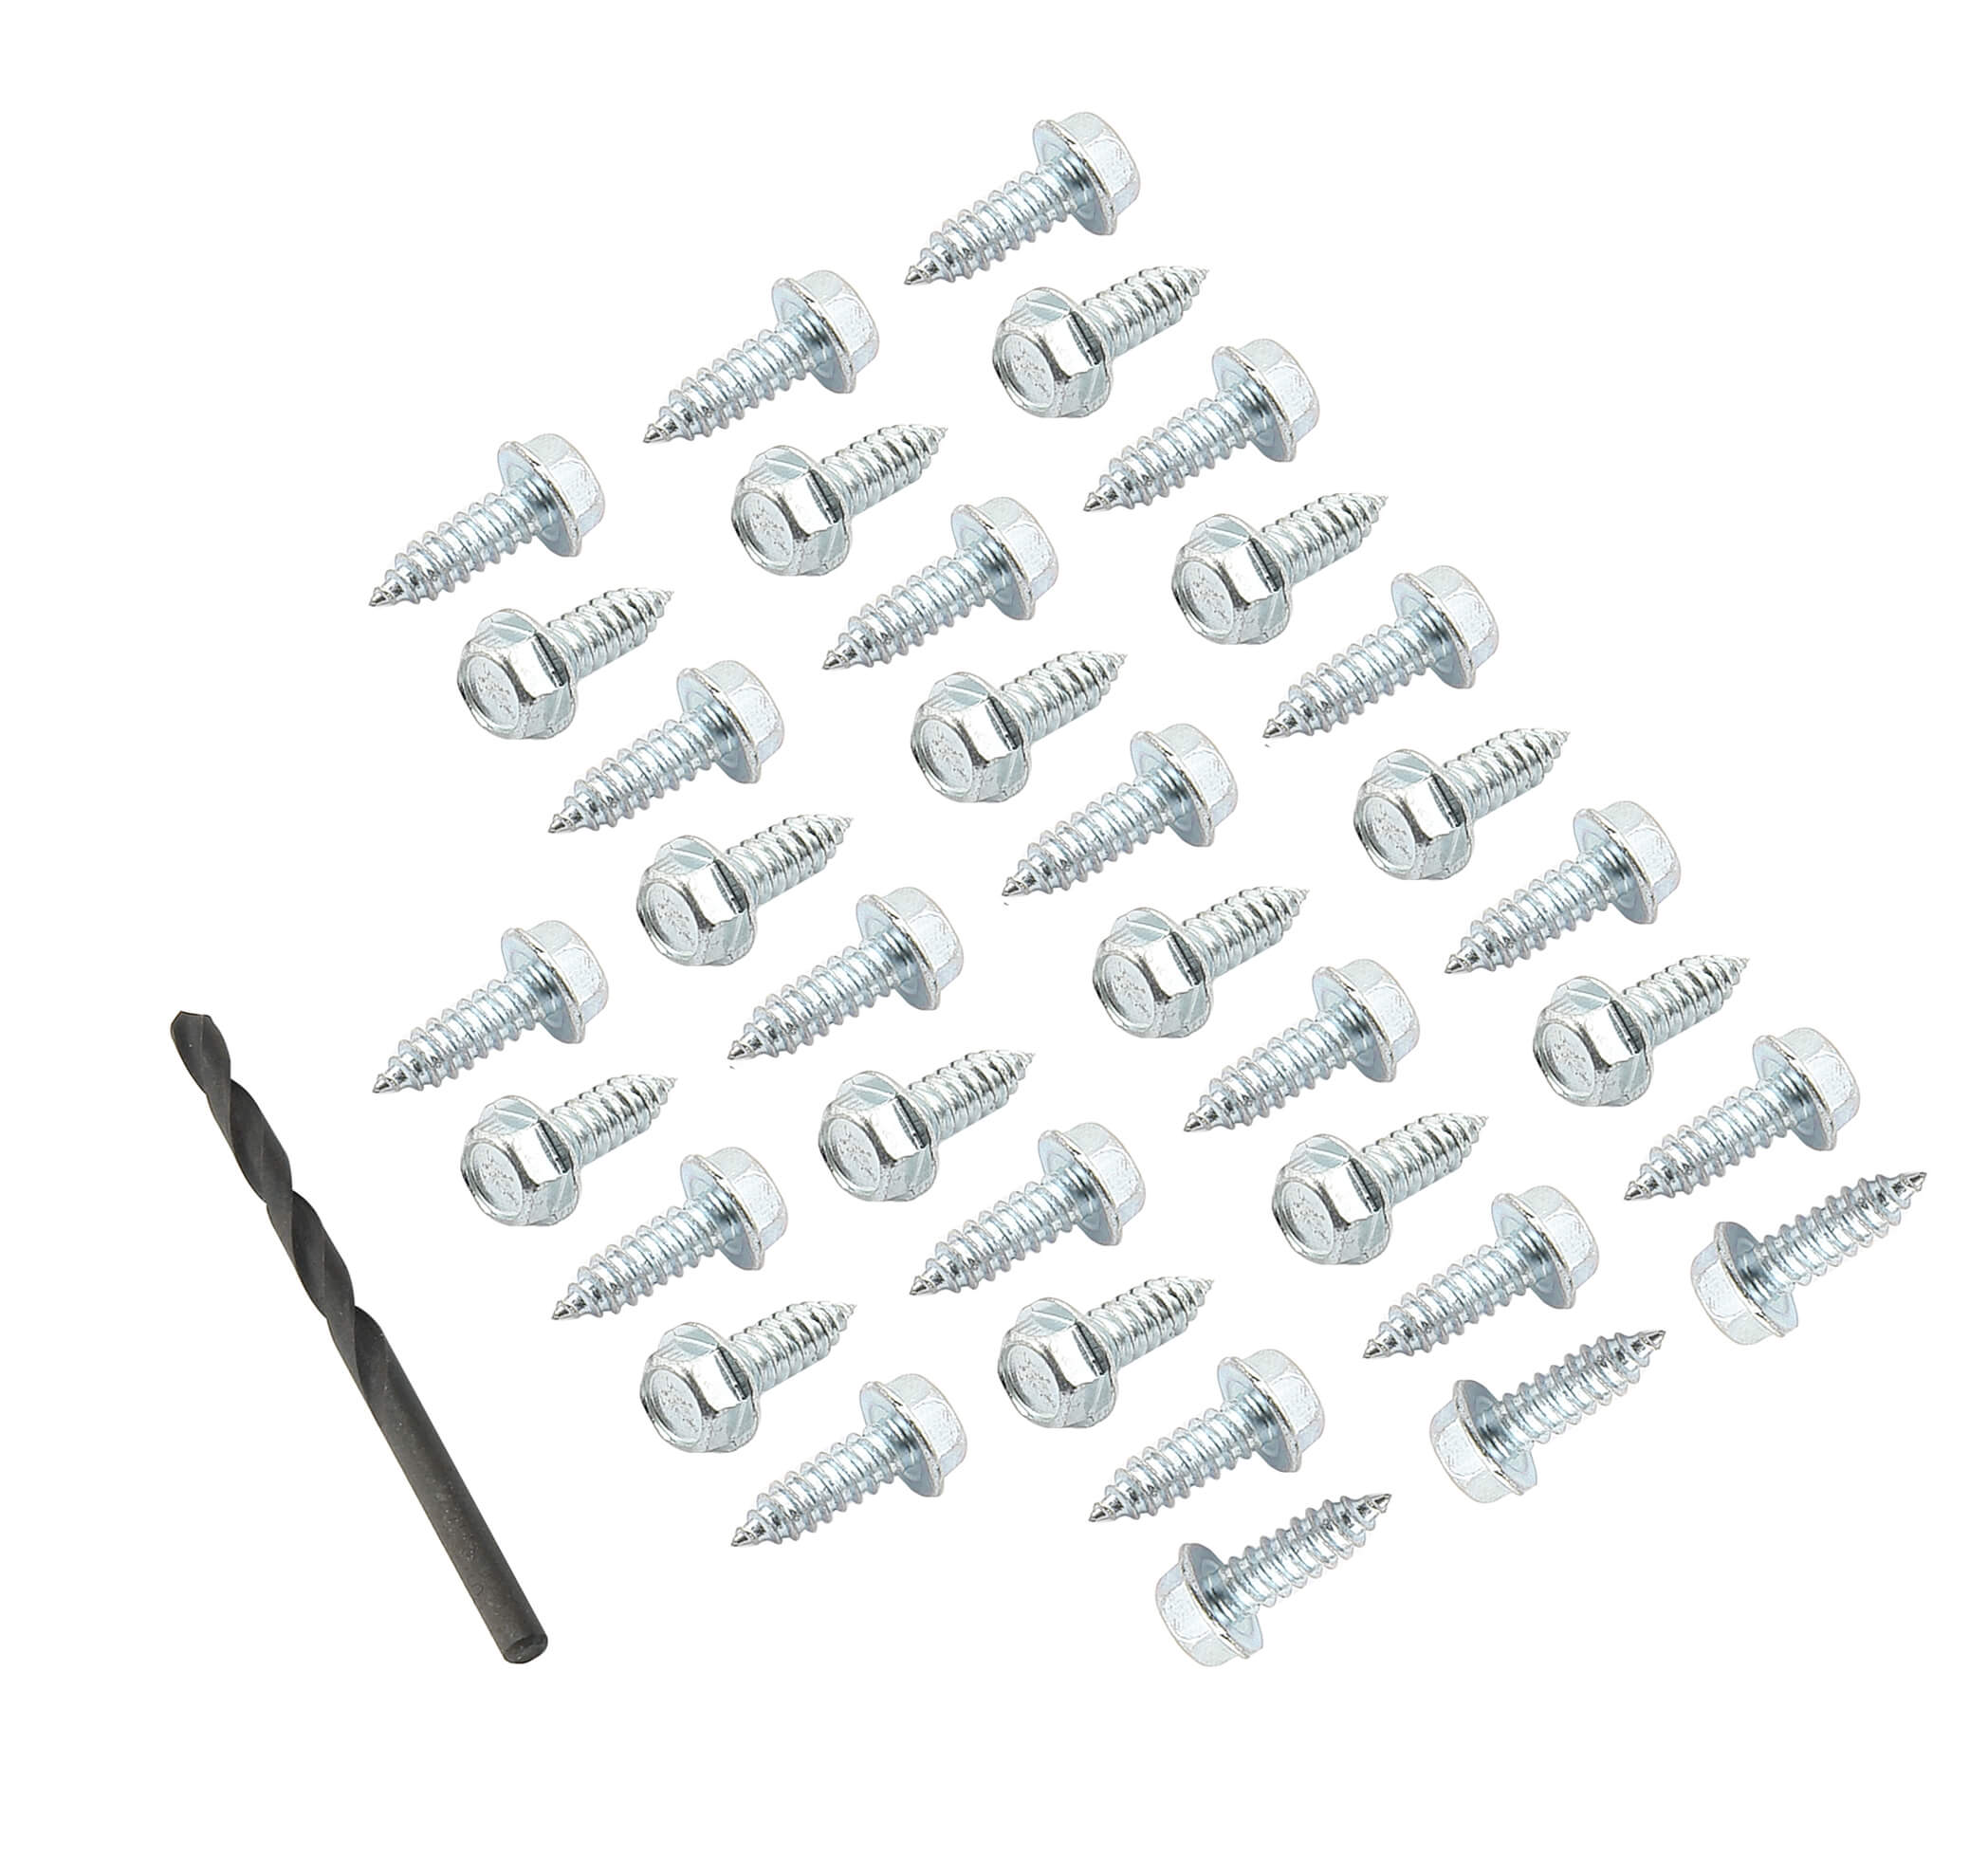 Mr Gasket Tyre Rim Screws Steel - 35 Pieces - Enough for Two Tires. Includes Drill Bit.